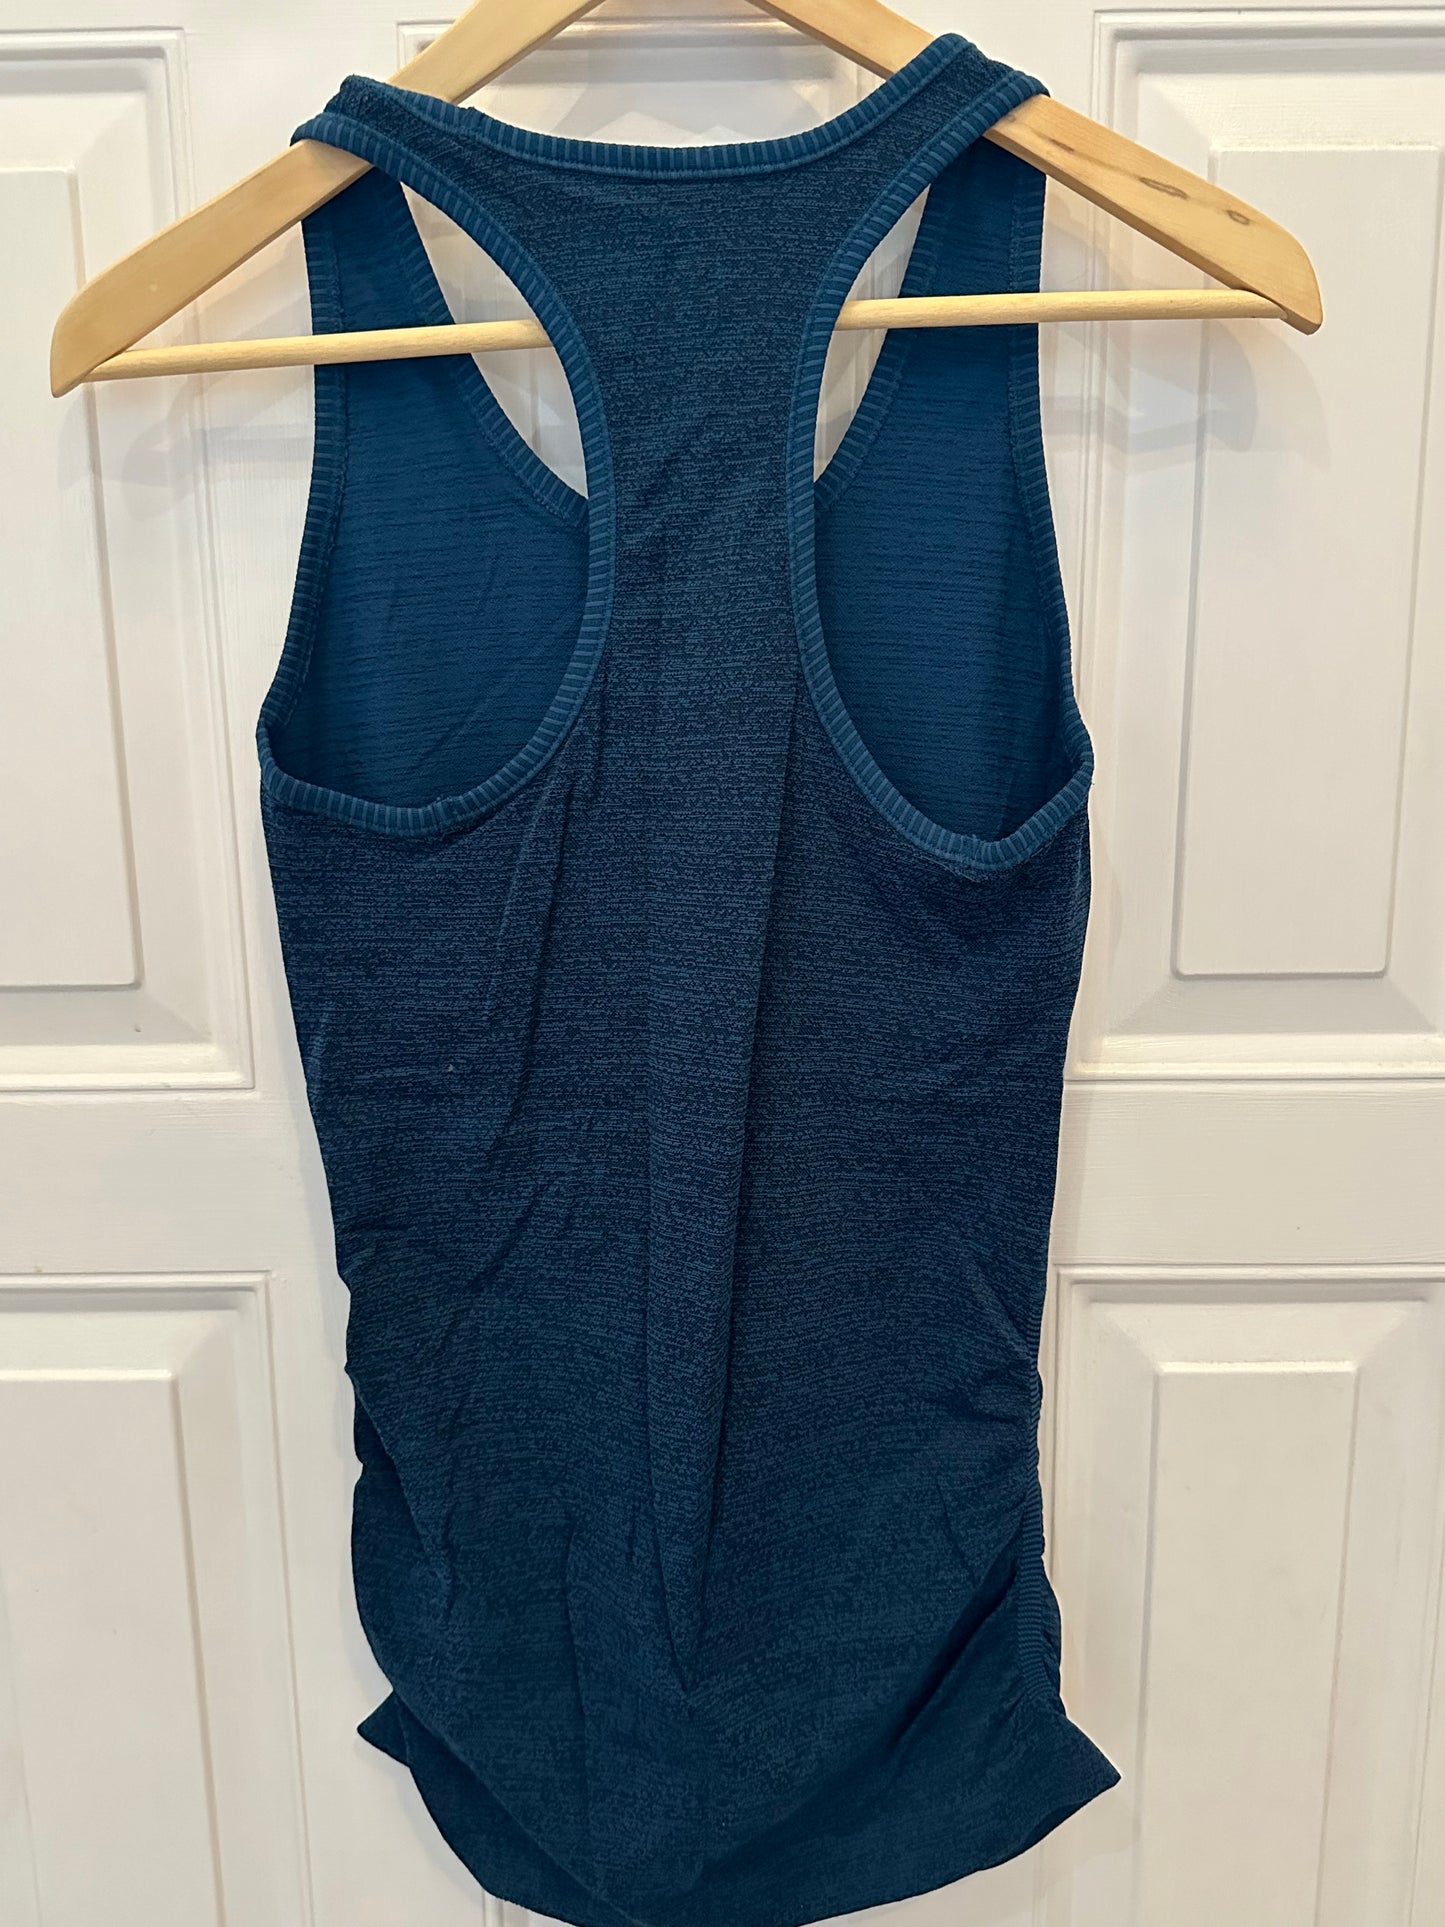 Athleta Women’s Sz XSmall XS Ribbed Teal Ruched Tank Top